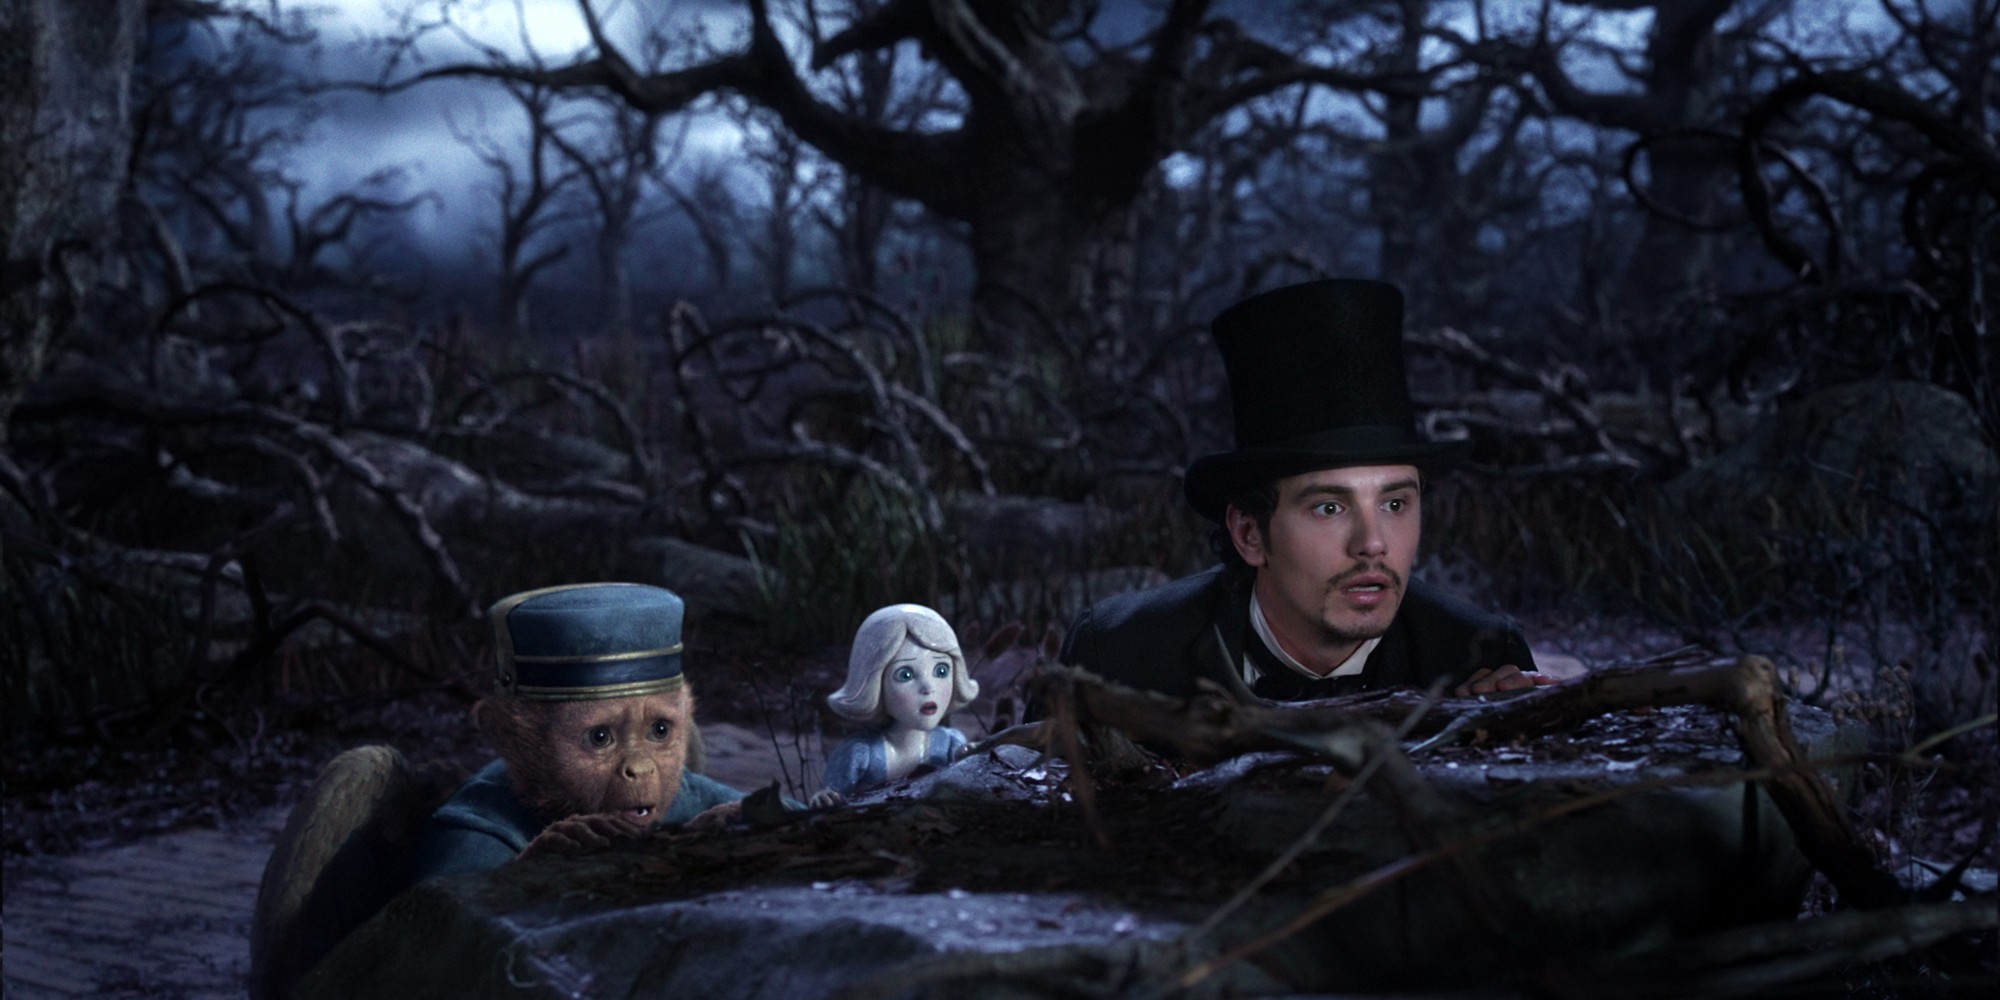 Flying Monkey, China Girl and James Franco (stars as Oz) in Walt Disney Pictures' Oz: The Great and Powerful (2013)